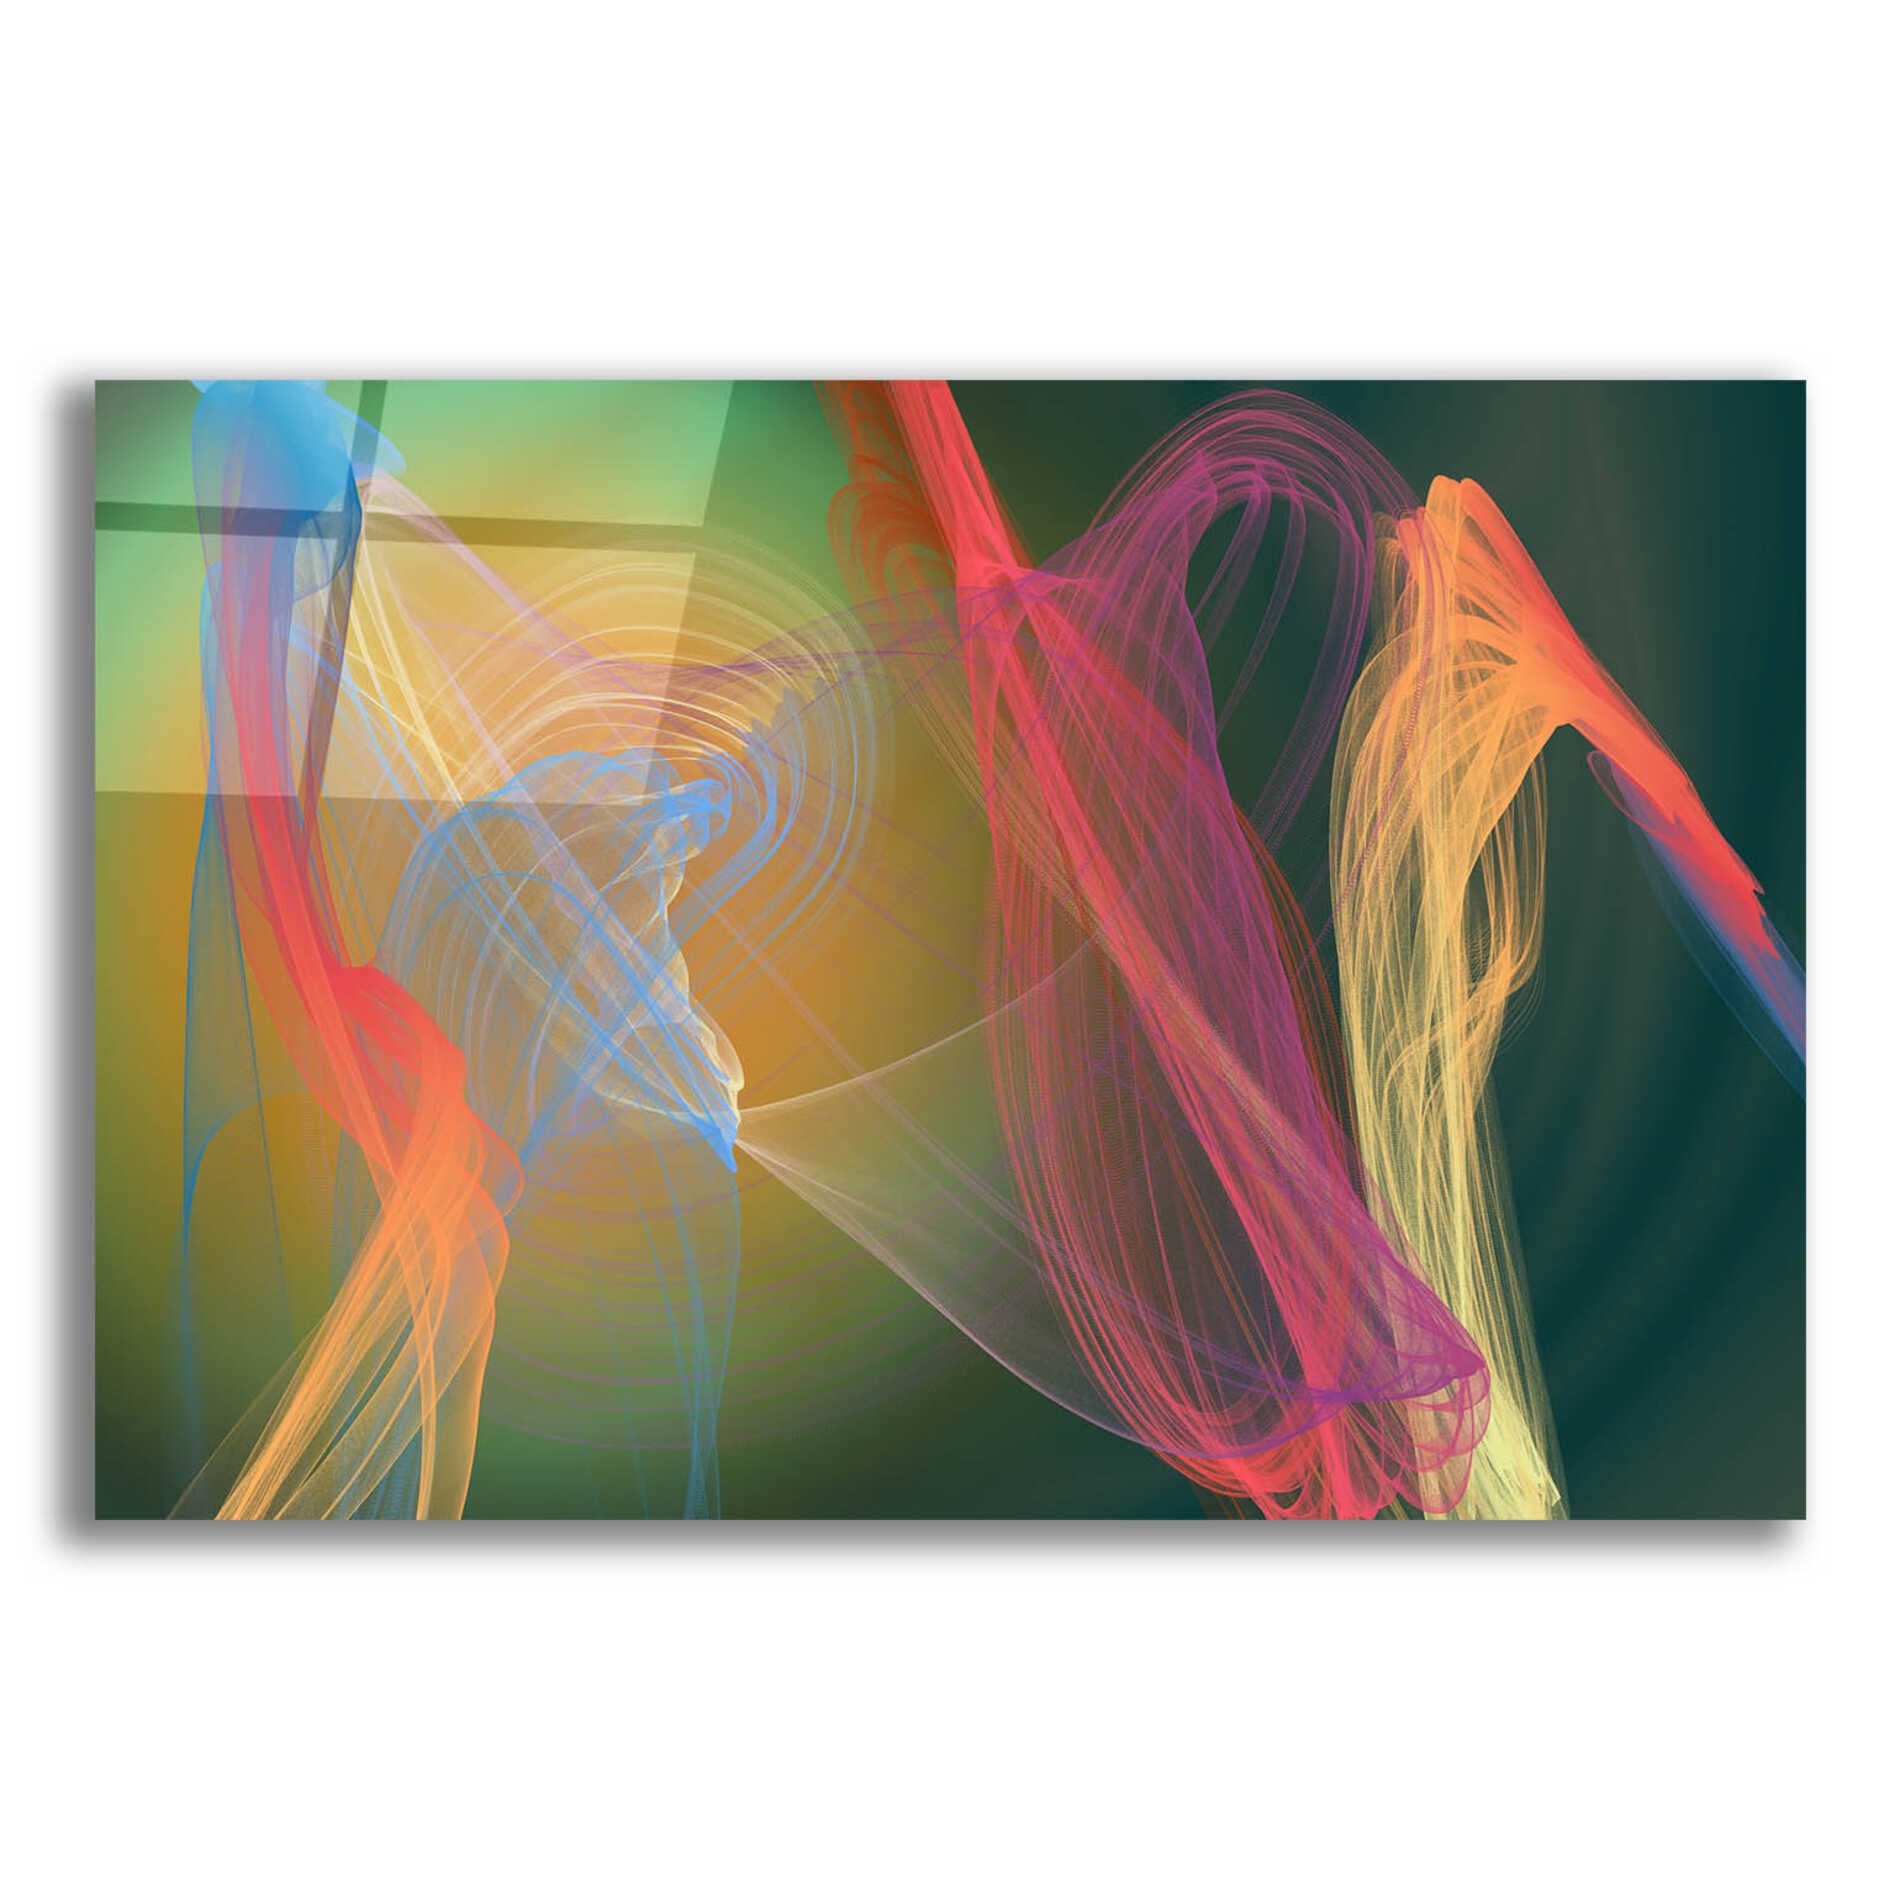 Epic Art 'Inverted Color In The Lines 9' by Irena Orlov Acrylic Glass Wall Art,24x16